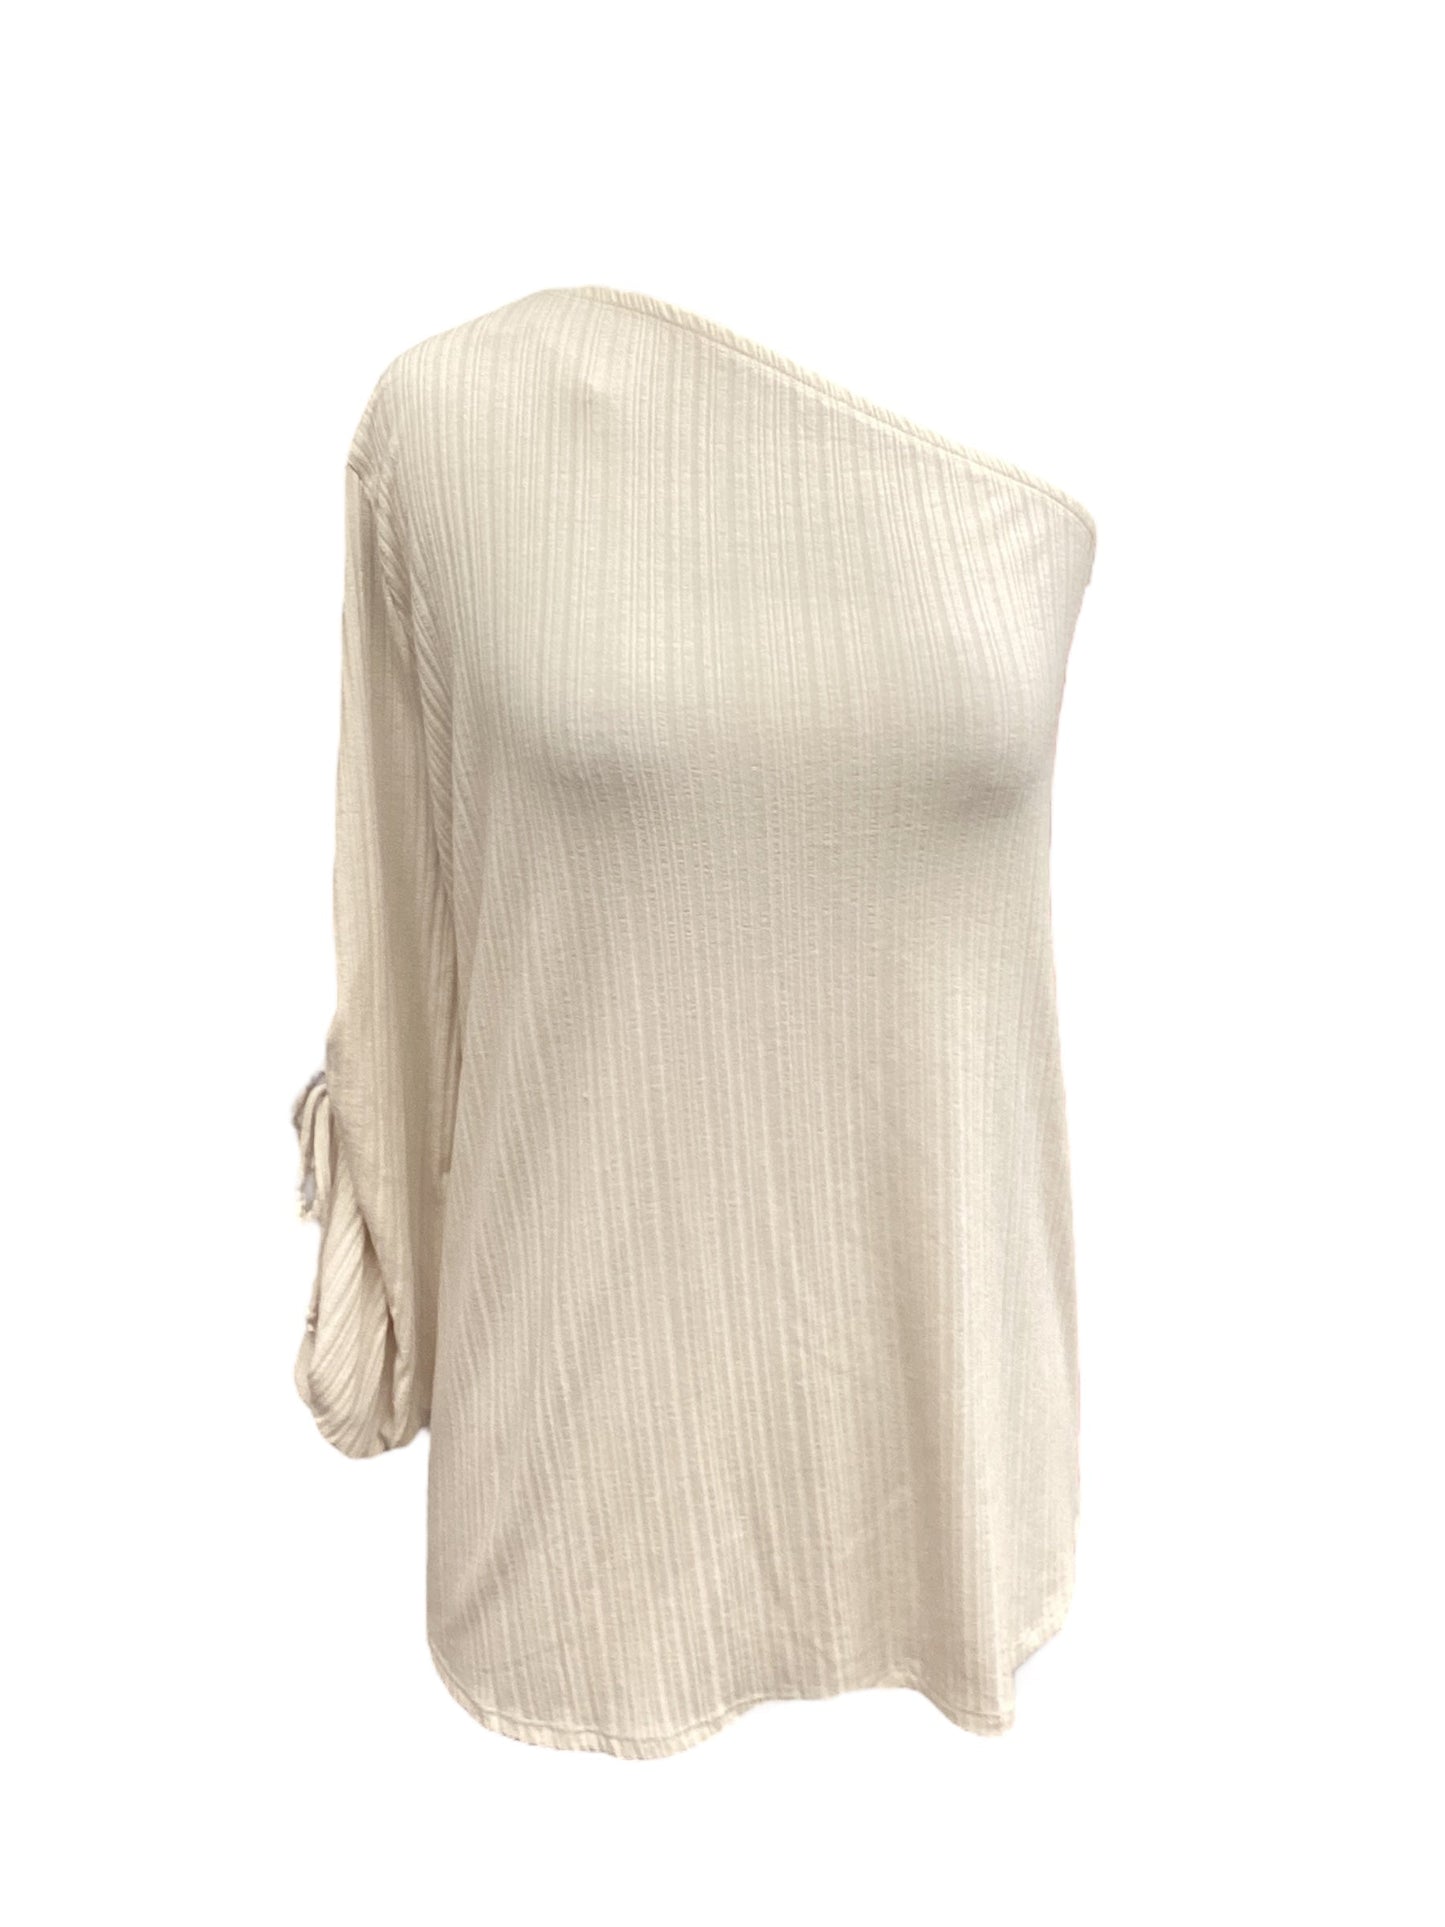 Beige Top 3/4 Sleeve Maurices, Size 3x